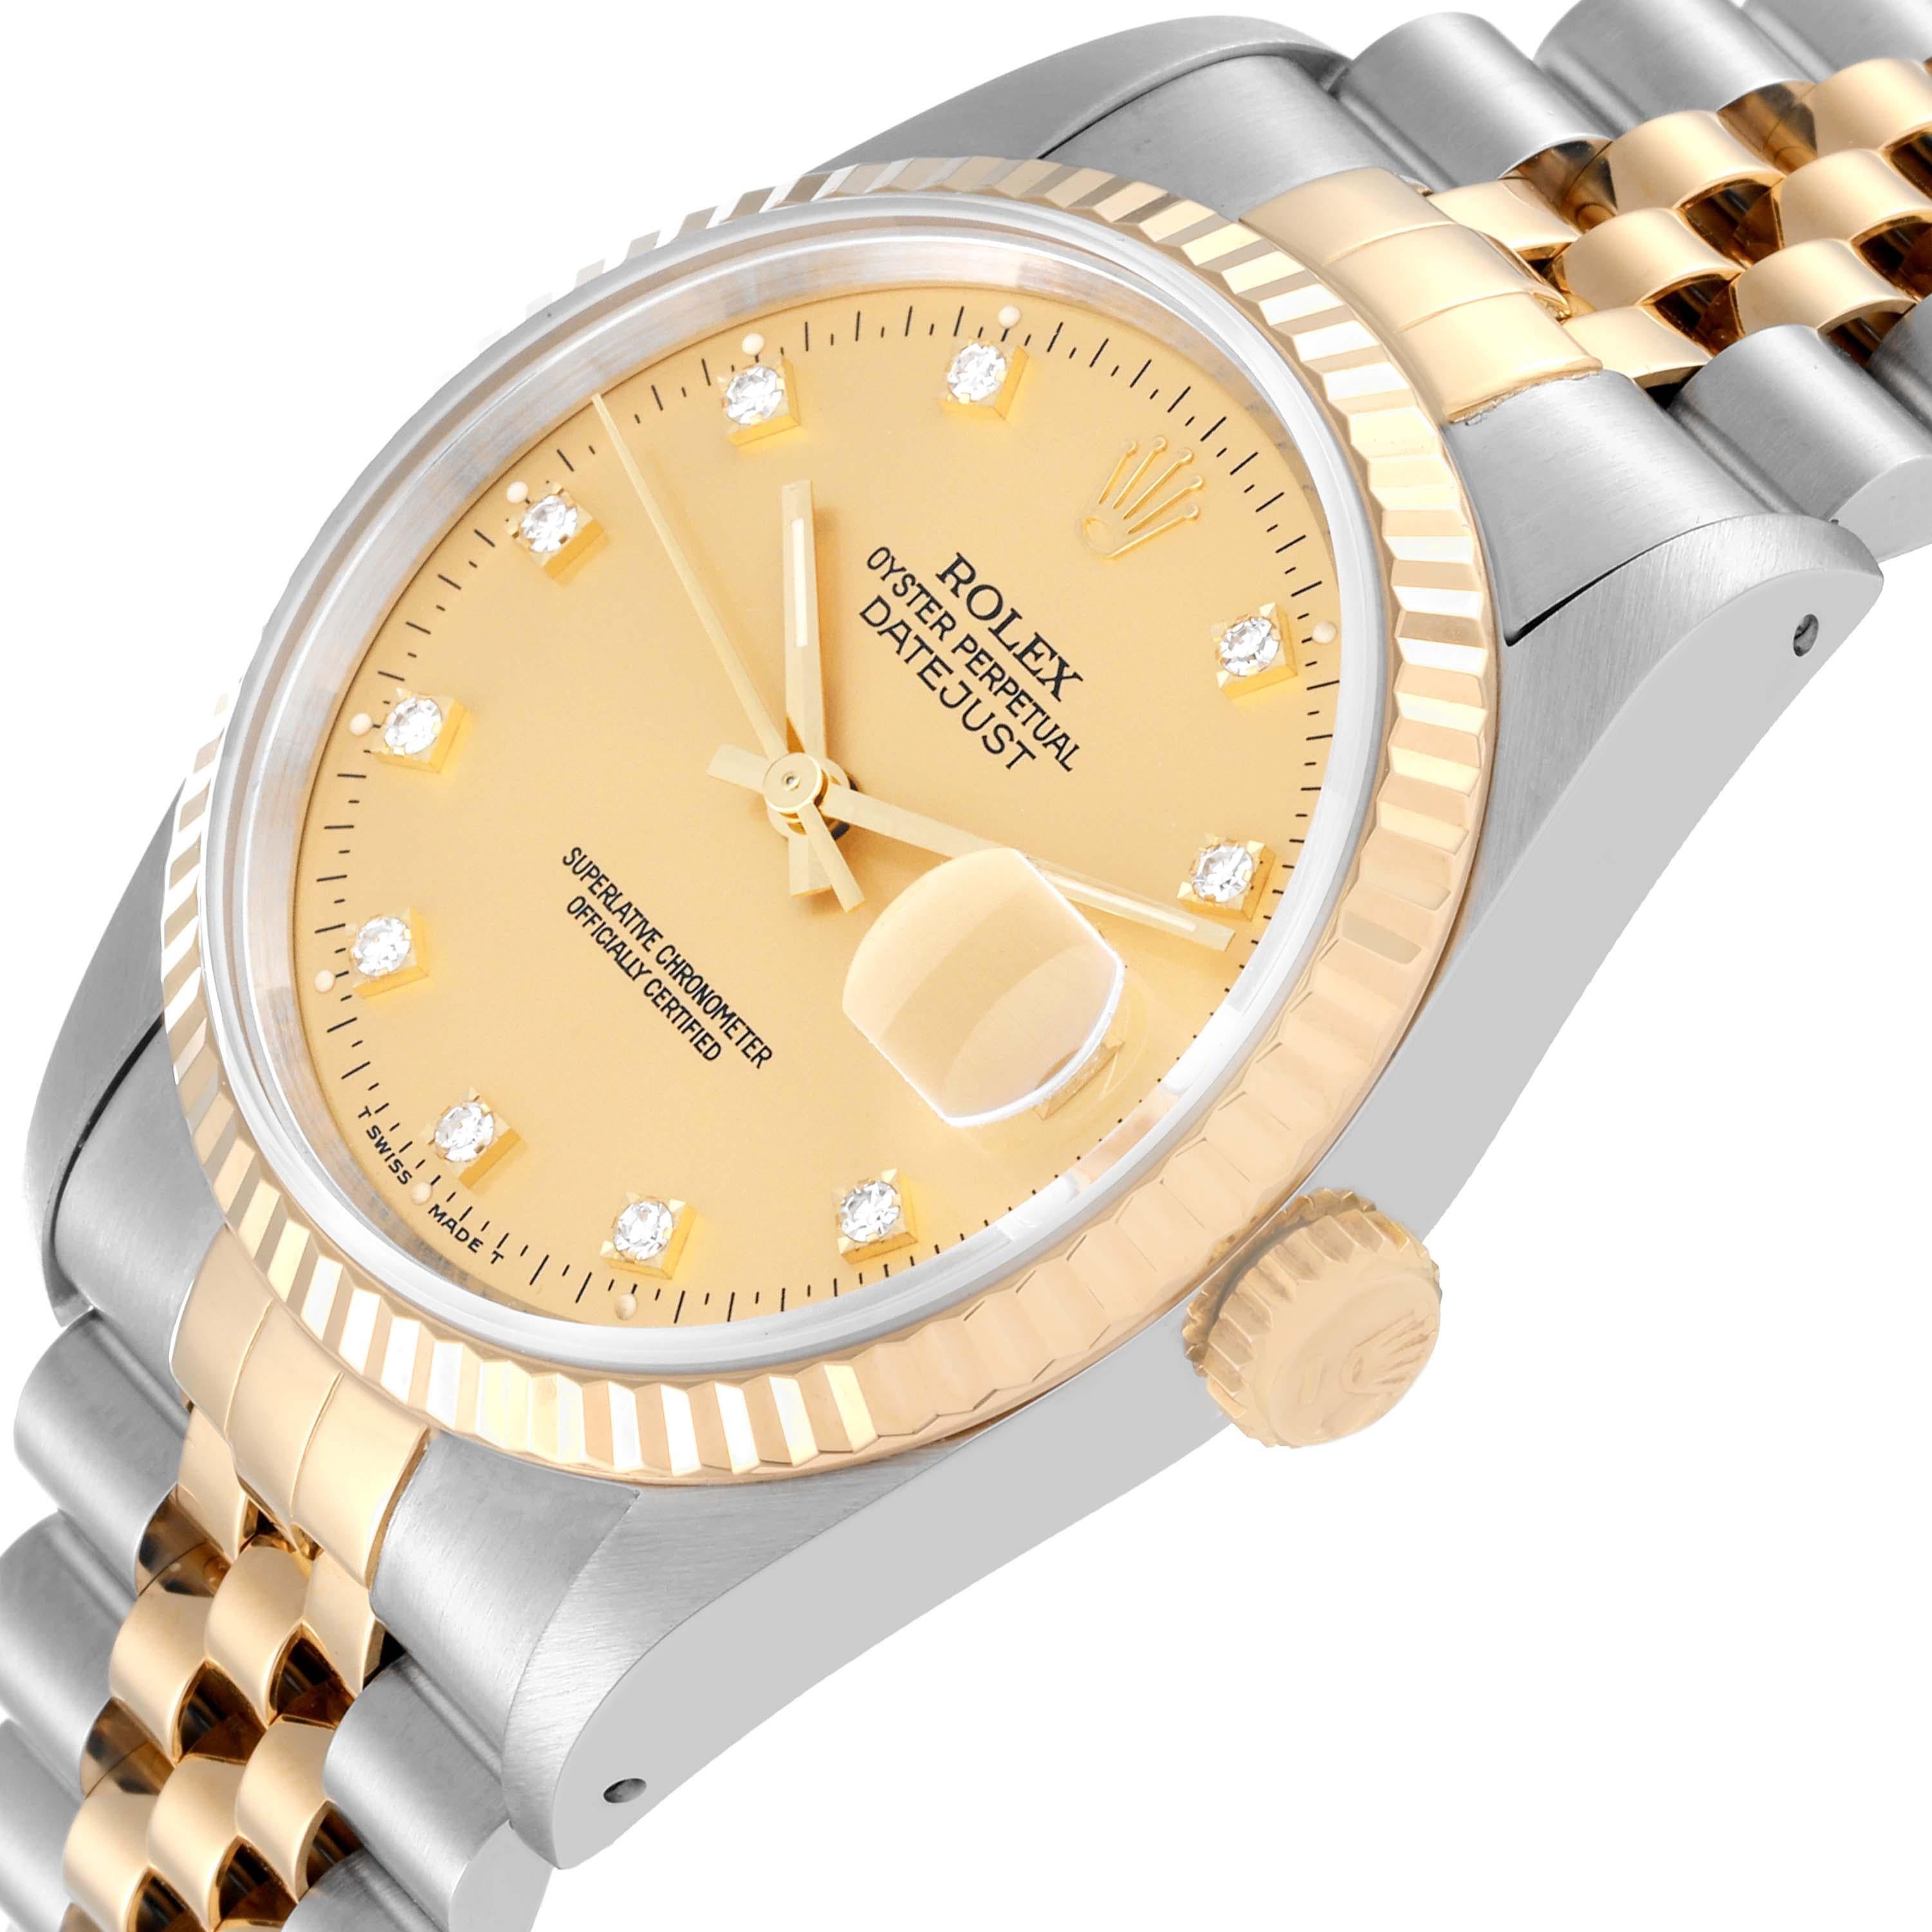 Rolex Datejust Champagne Diamond Dial Steel Yellow Gold Mens Watch 16233 For Sale 1